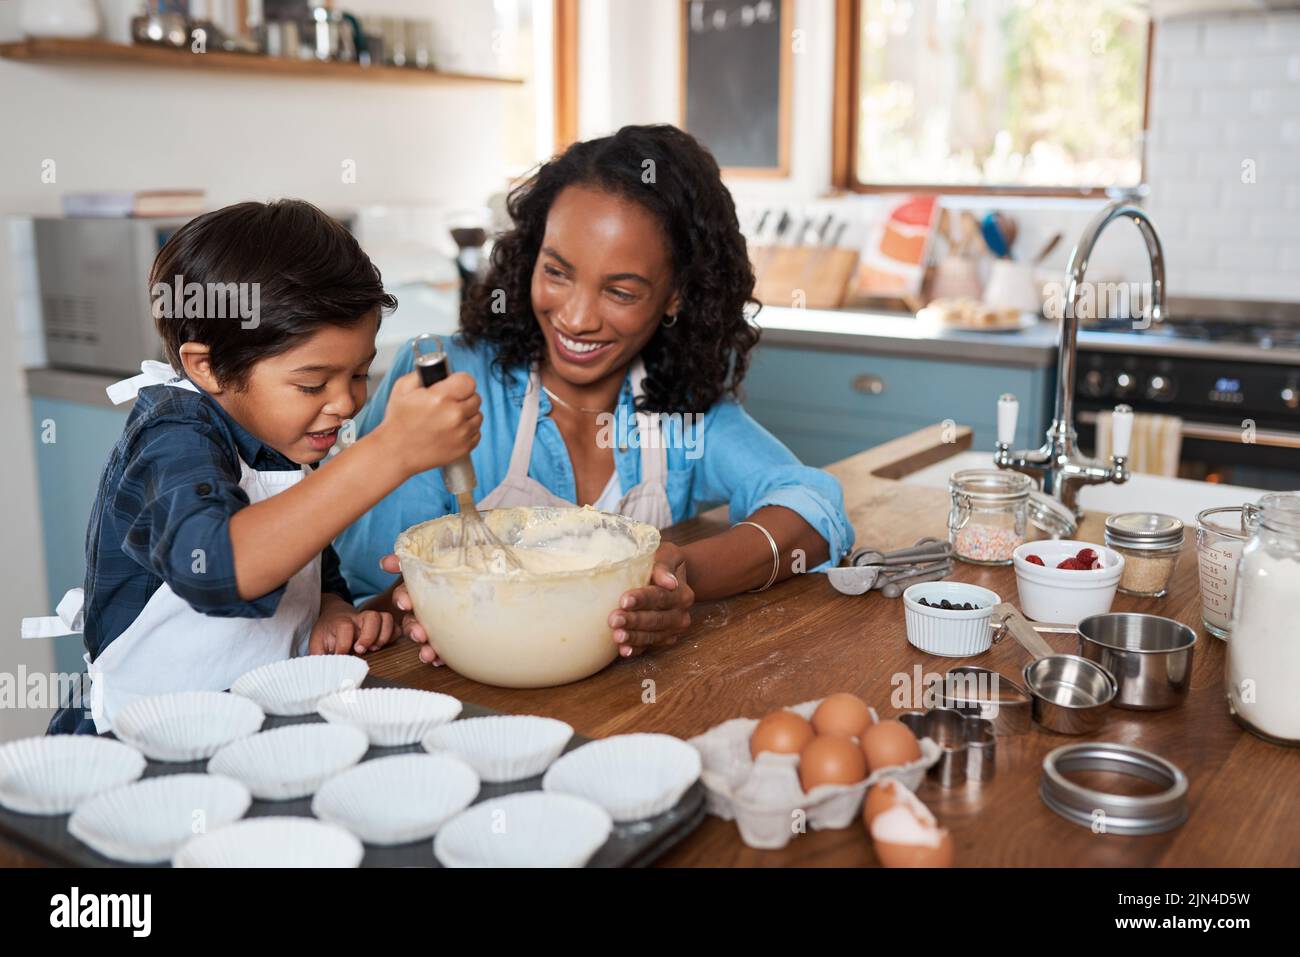 https://c8.alamy.com/comp/2JN4D5W/whisk-away-little-chef-a-woman-baking-at-home-with-her-young-son-2JN4D5W.jpg